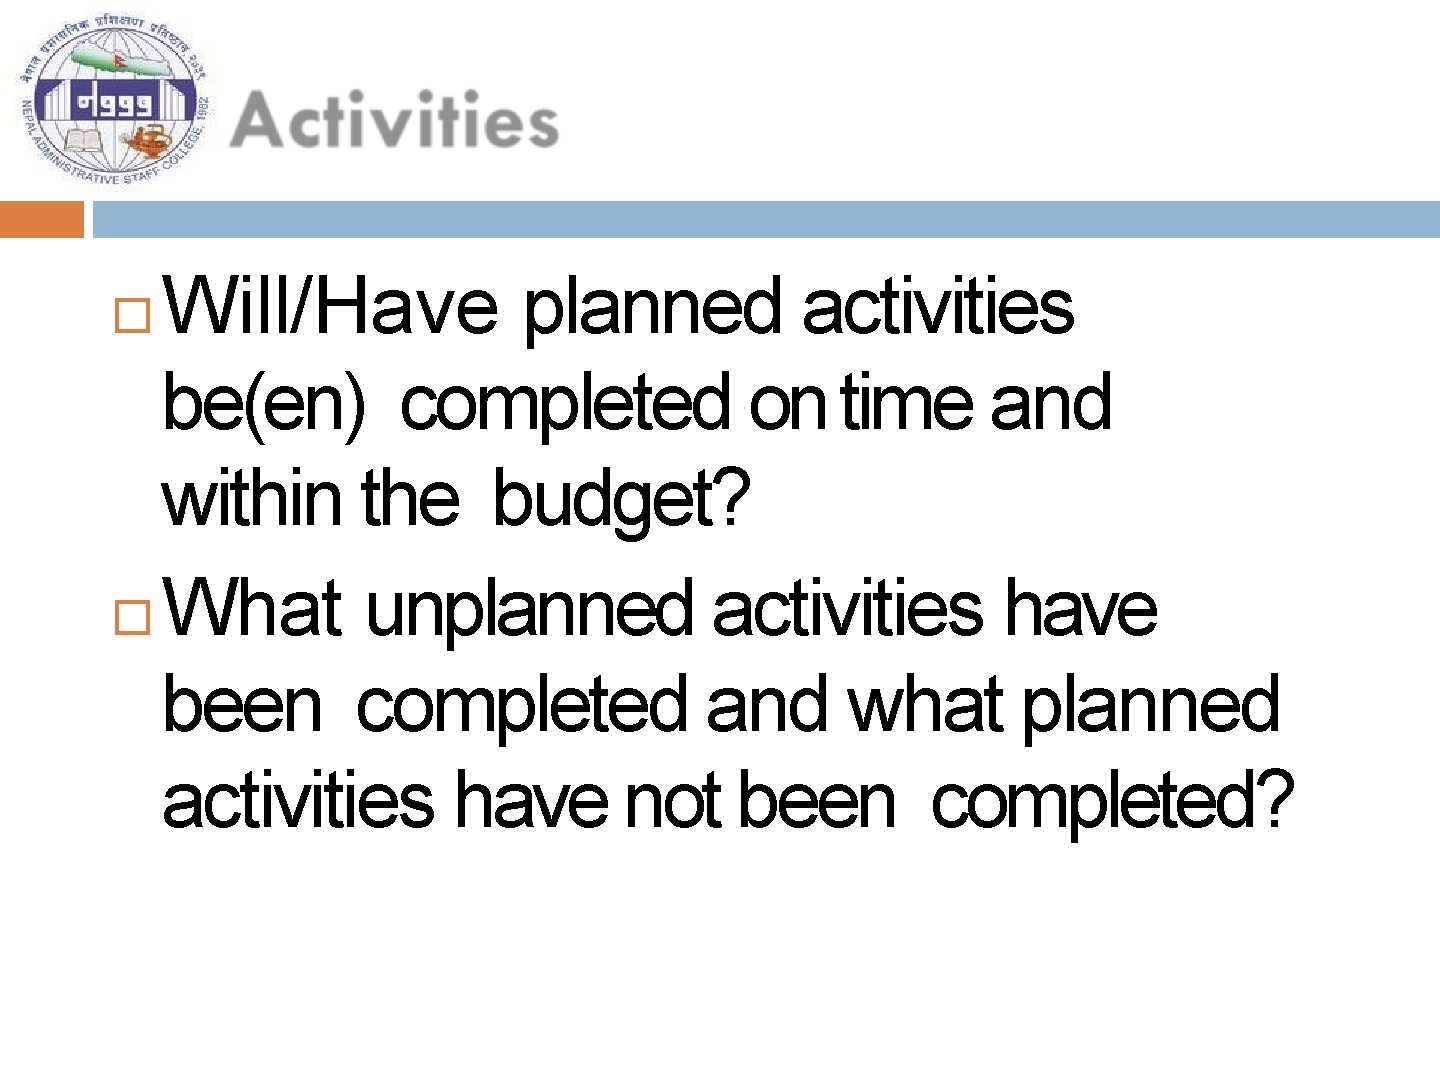 Will/Have planned activities be(en) completed on time and within the budget? What unplanned activities